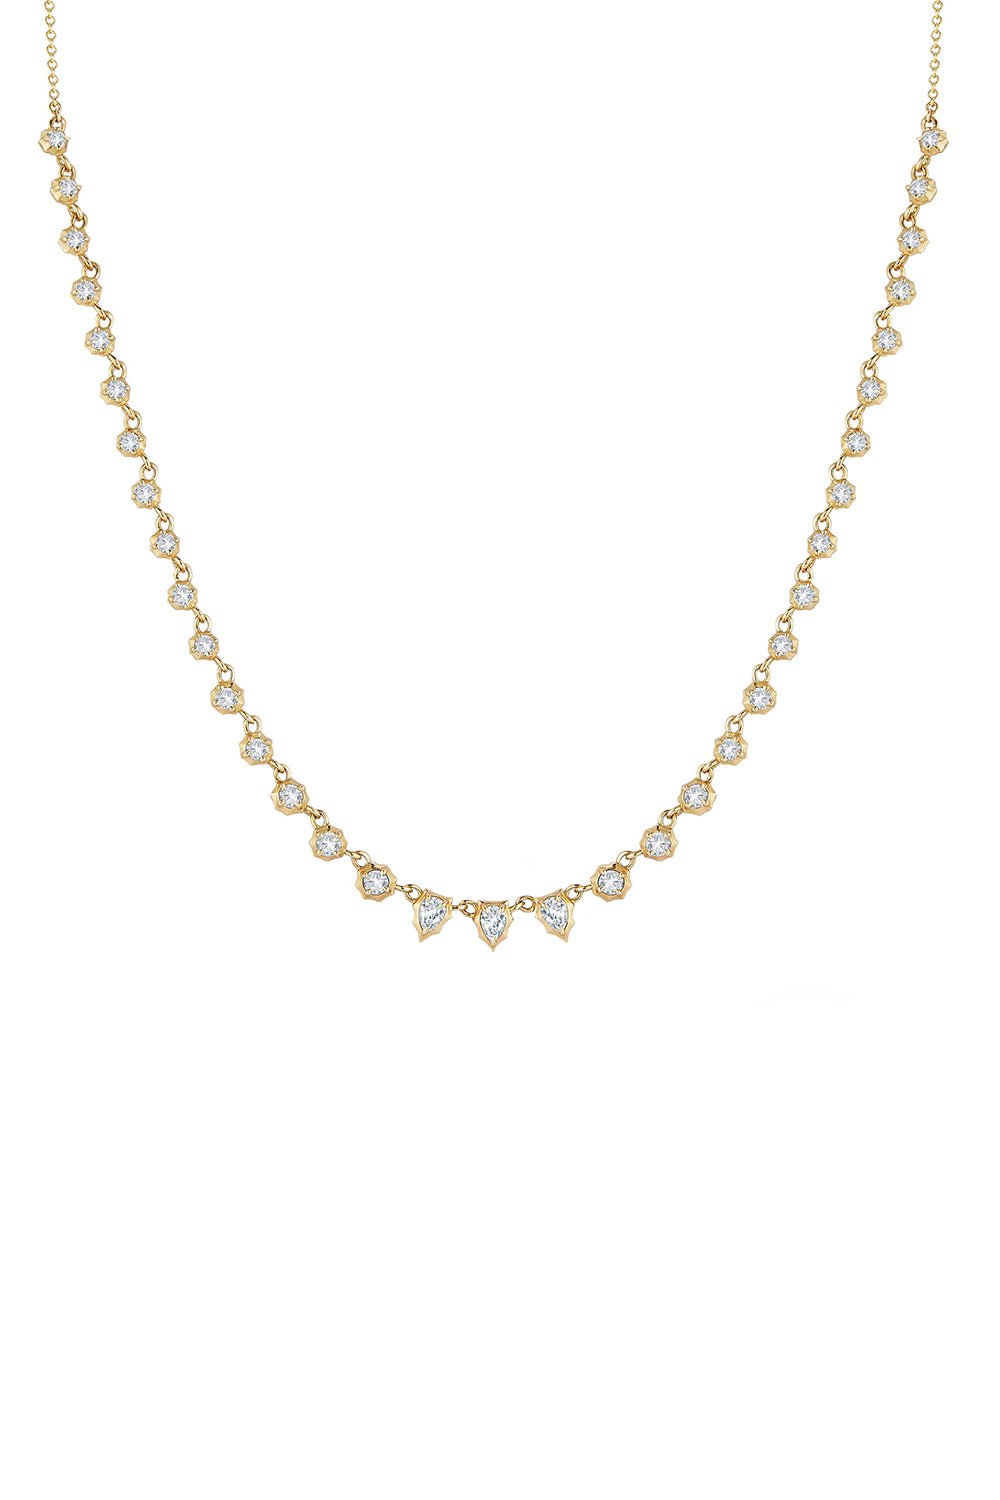 JADE TRAU-Small Envoy Riviera Necklace-YELLOW GOLD